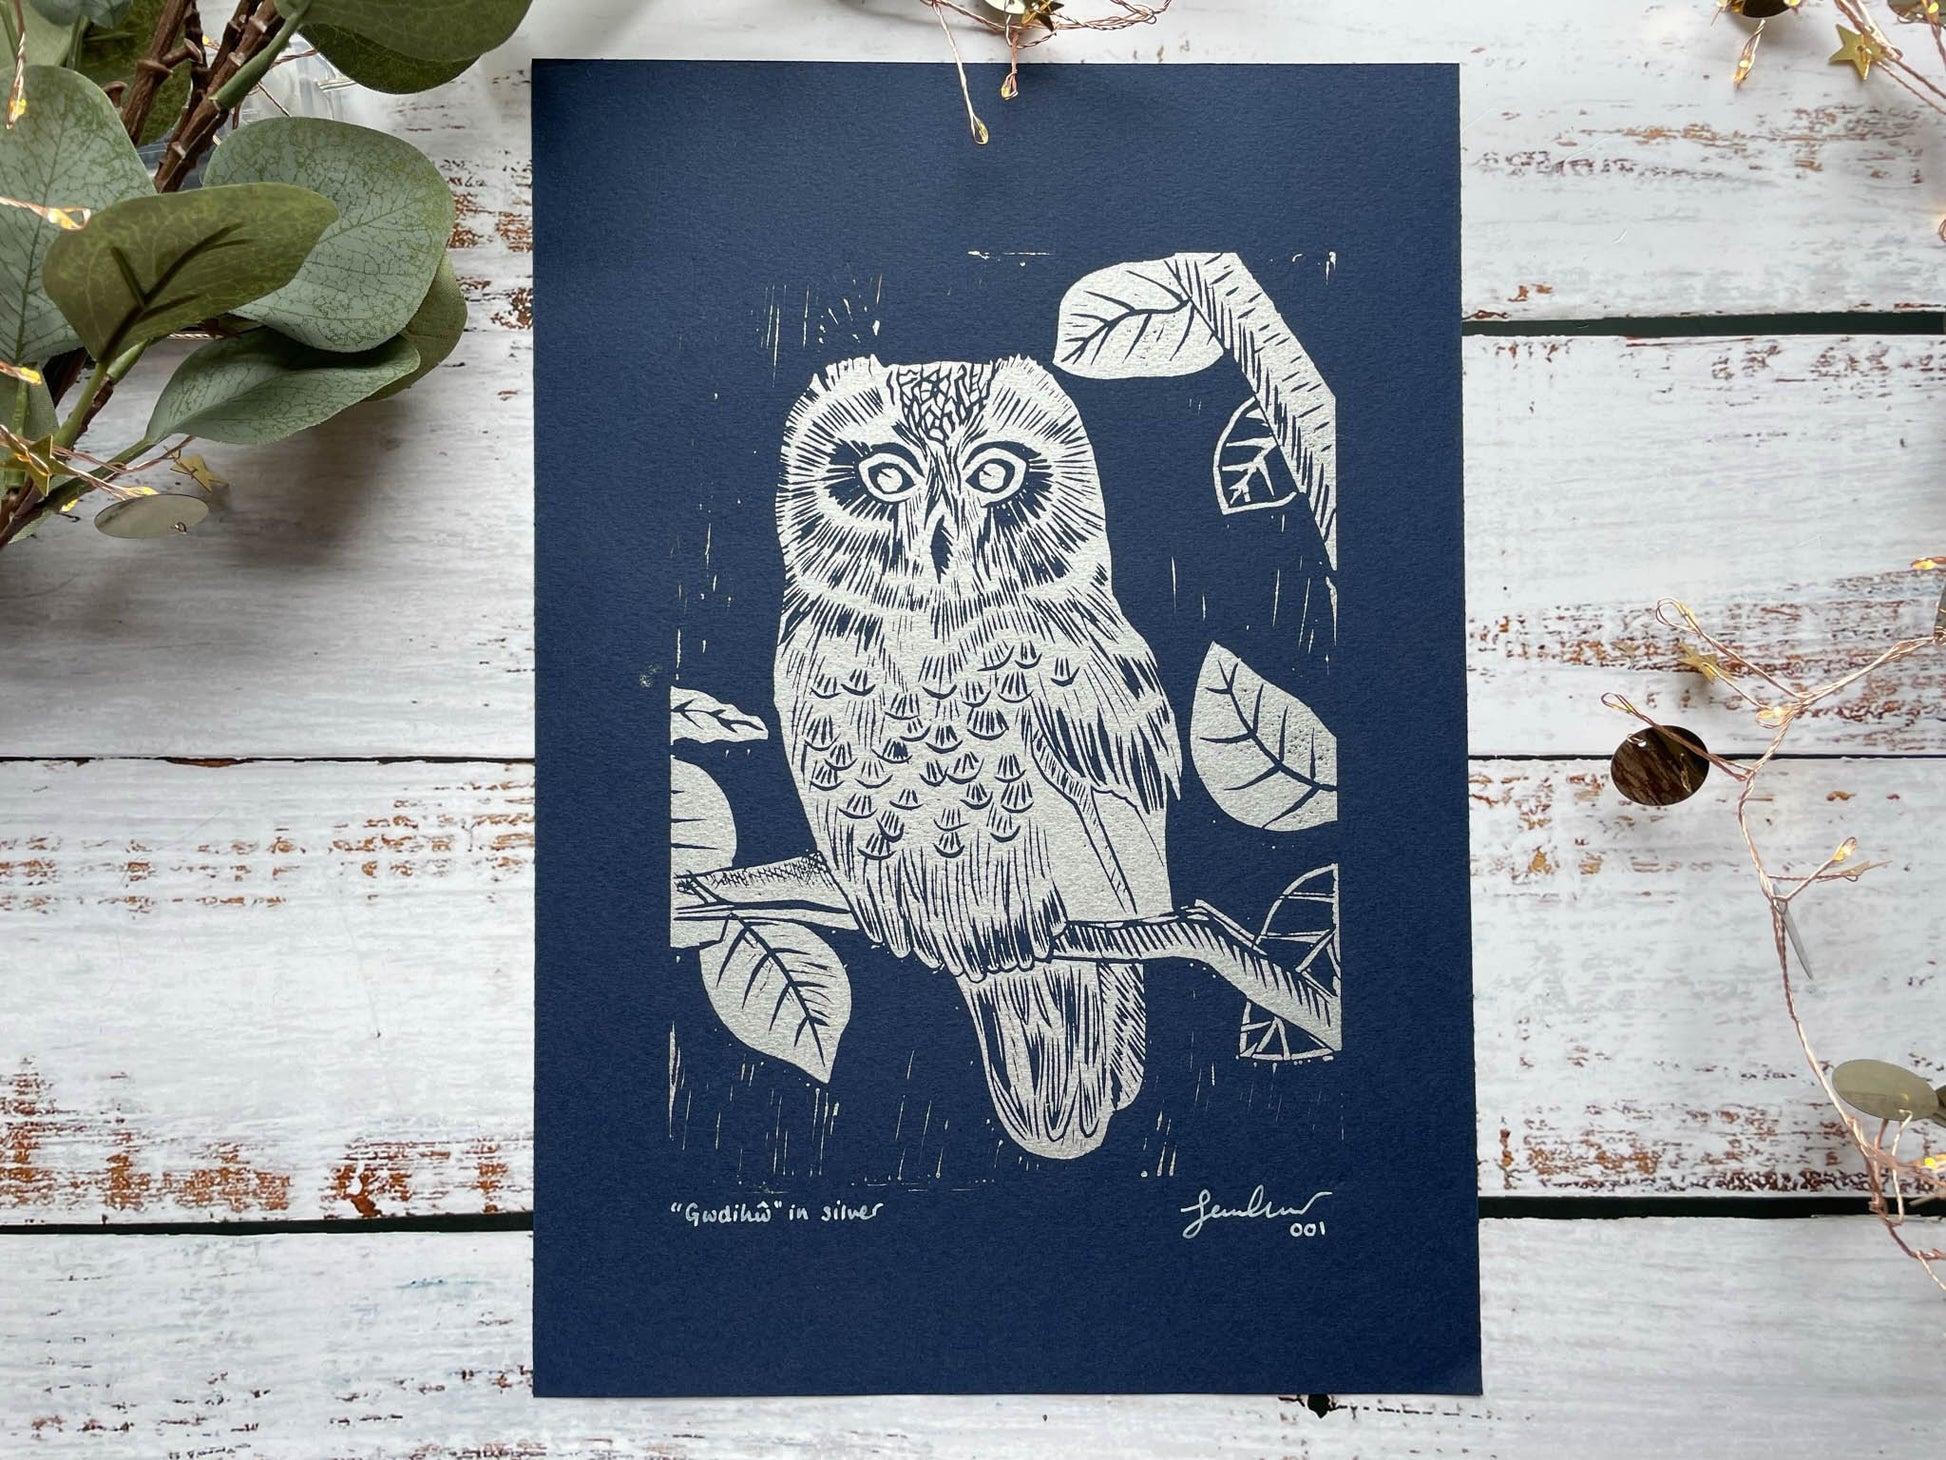 A lino print of an owl sitting in a tree in silver on navy blue paper